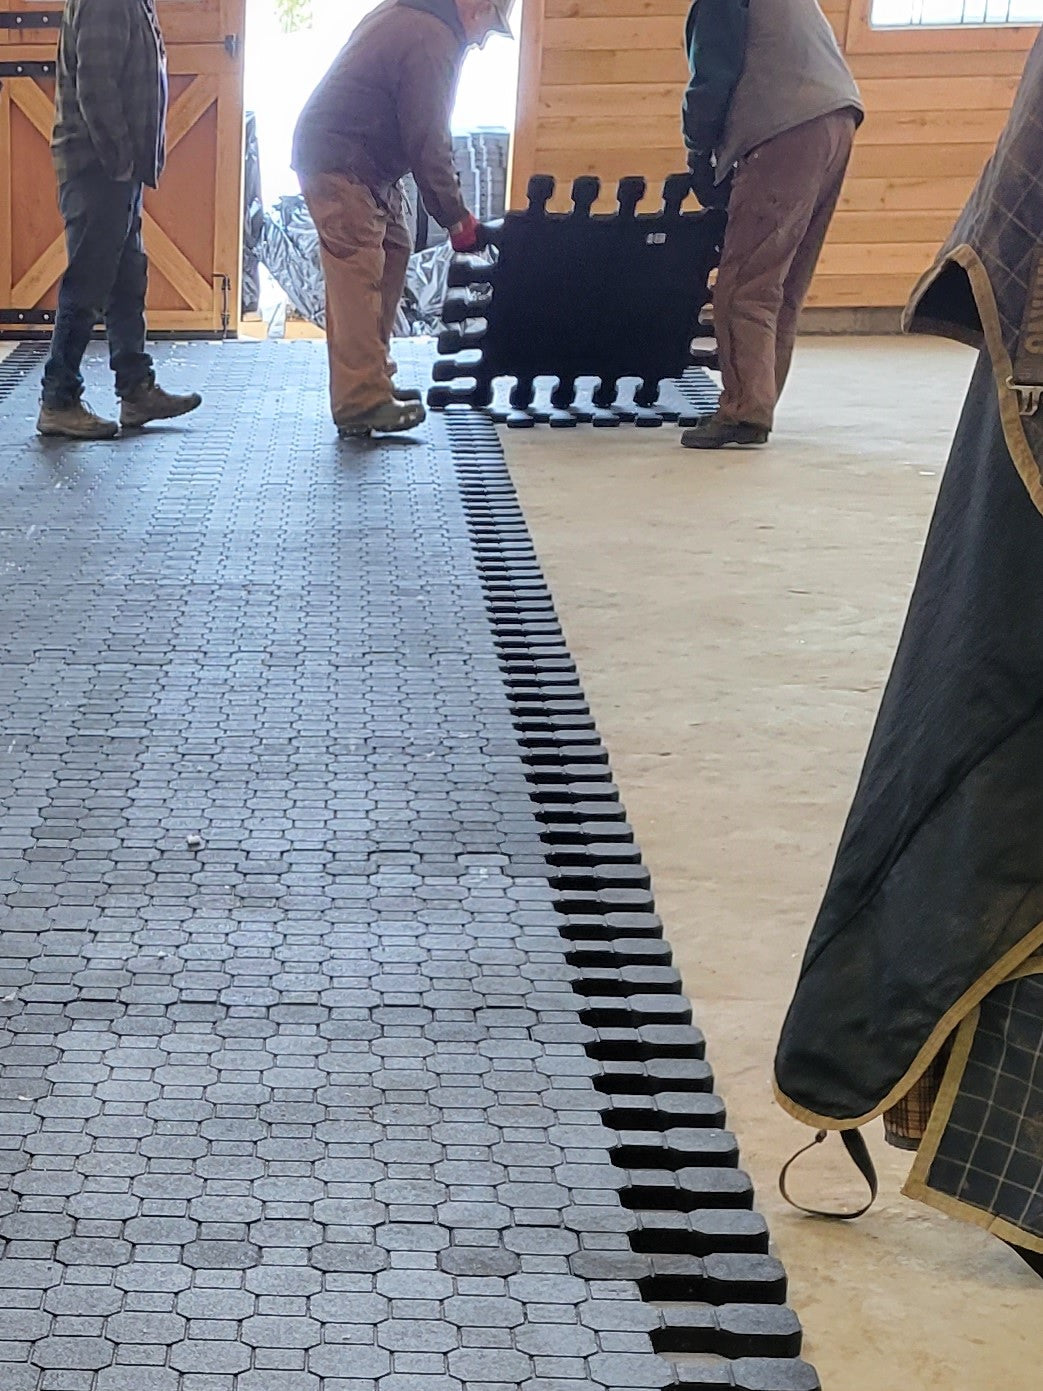 Rubber interlock flooring being put together, an easy solution for comfortable barn flooring